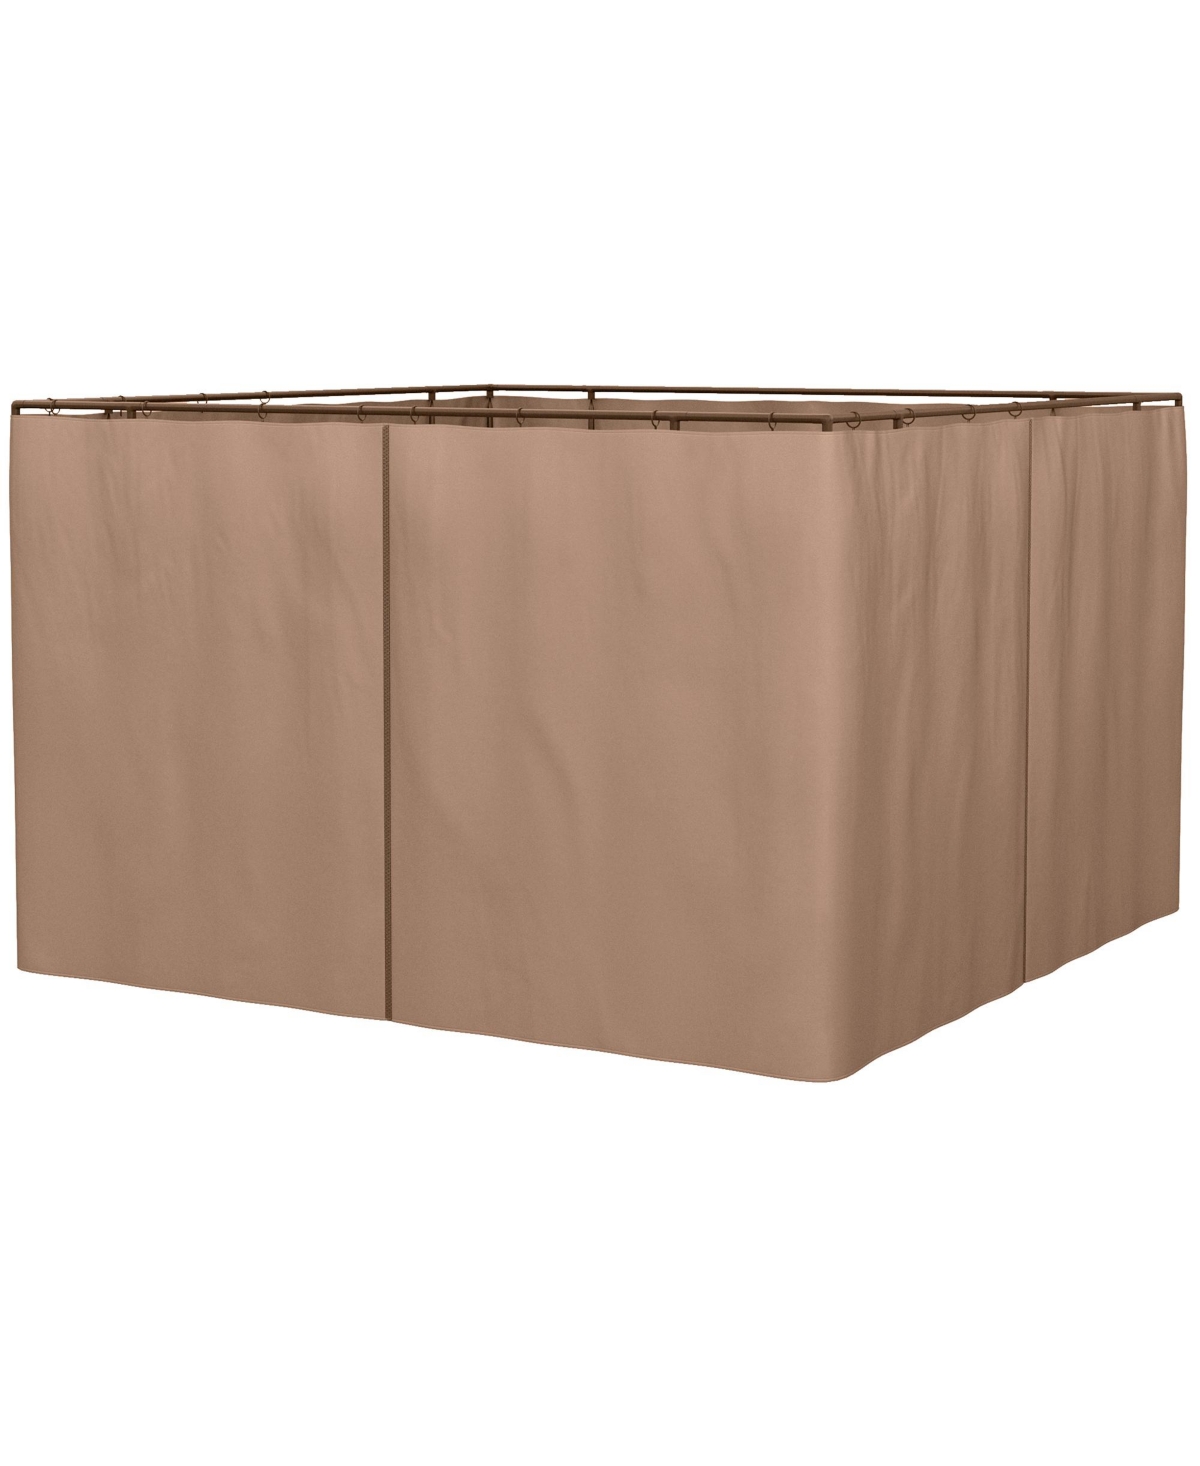 10' x 10' Universal Gazebo Sidewall Set with 4 Panels, 40 Hooks/C-Rings Included for Pergolas & Cabanas, Brown - Brown